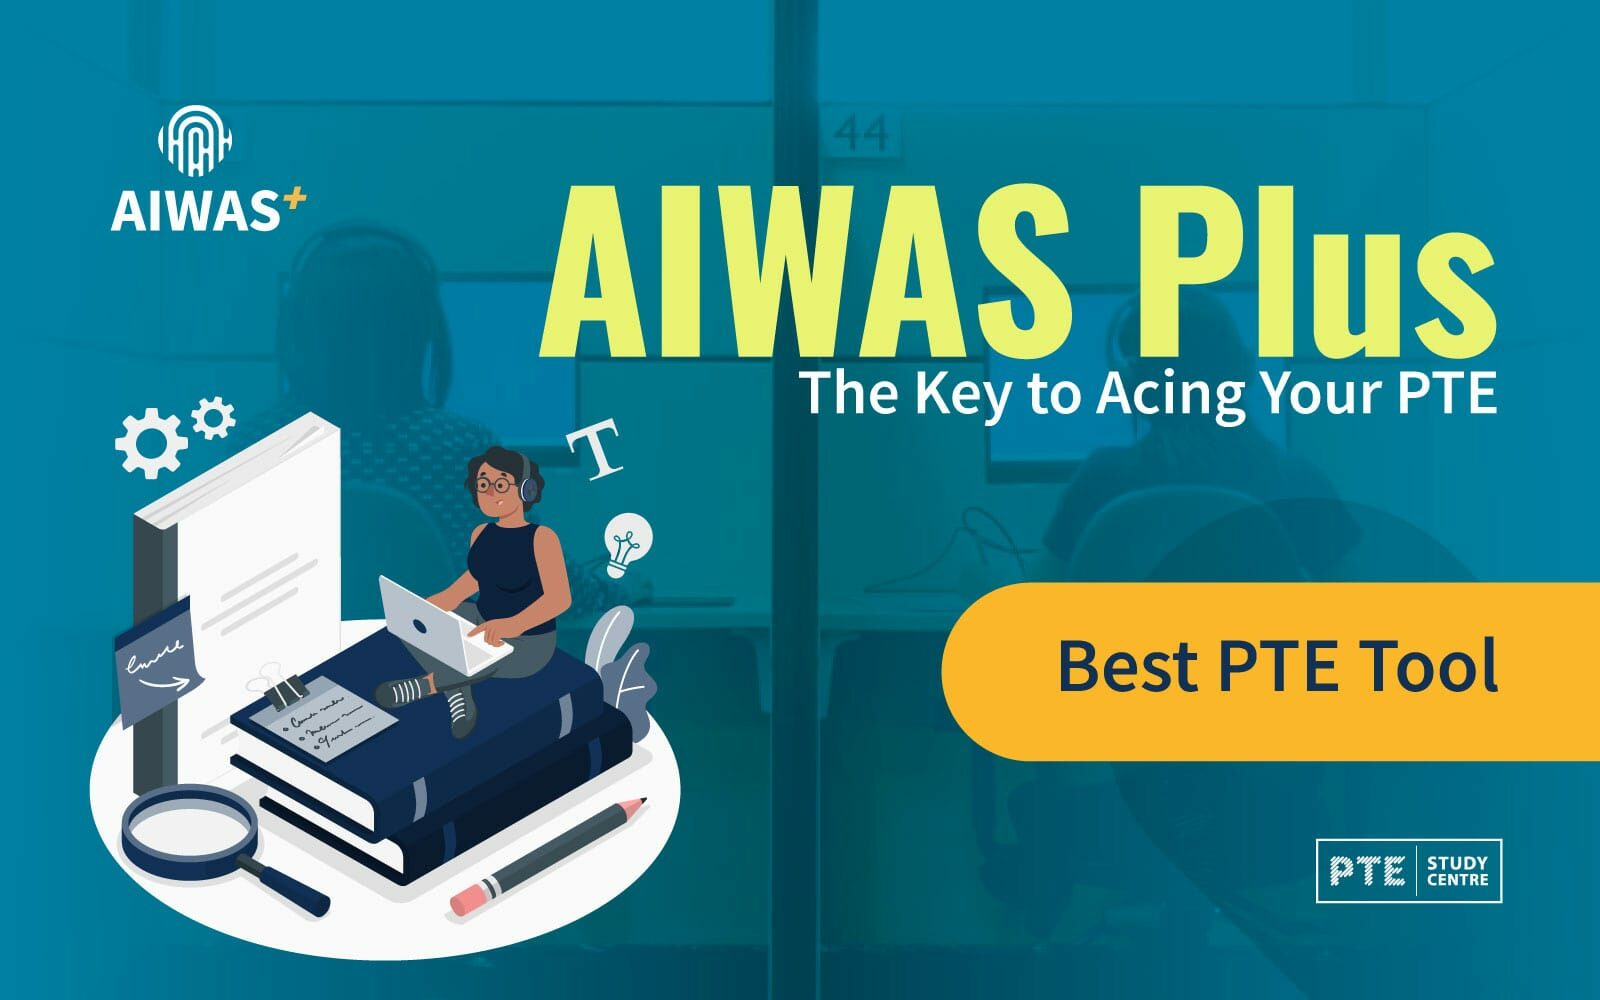 AIWAS Plus: The Key to Acing Your PTE